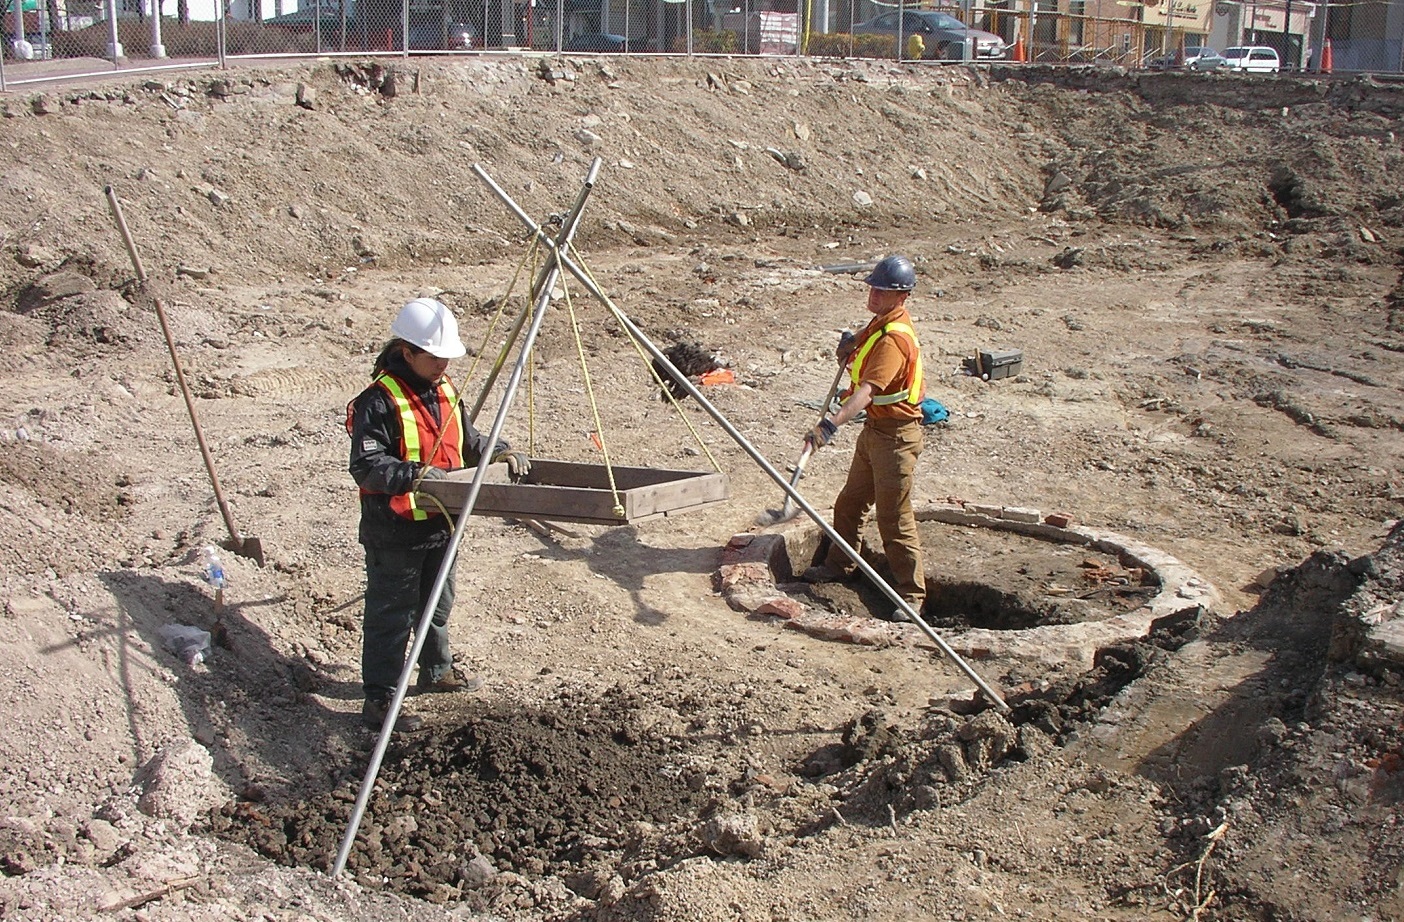 Two archaeologists stand in the bottom of a large excavation in an urban setting. One works the screen while the other digs out an old well or cistern.